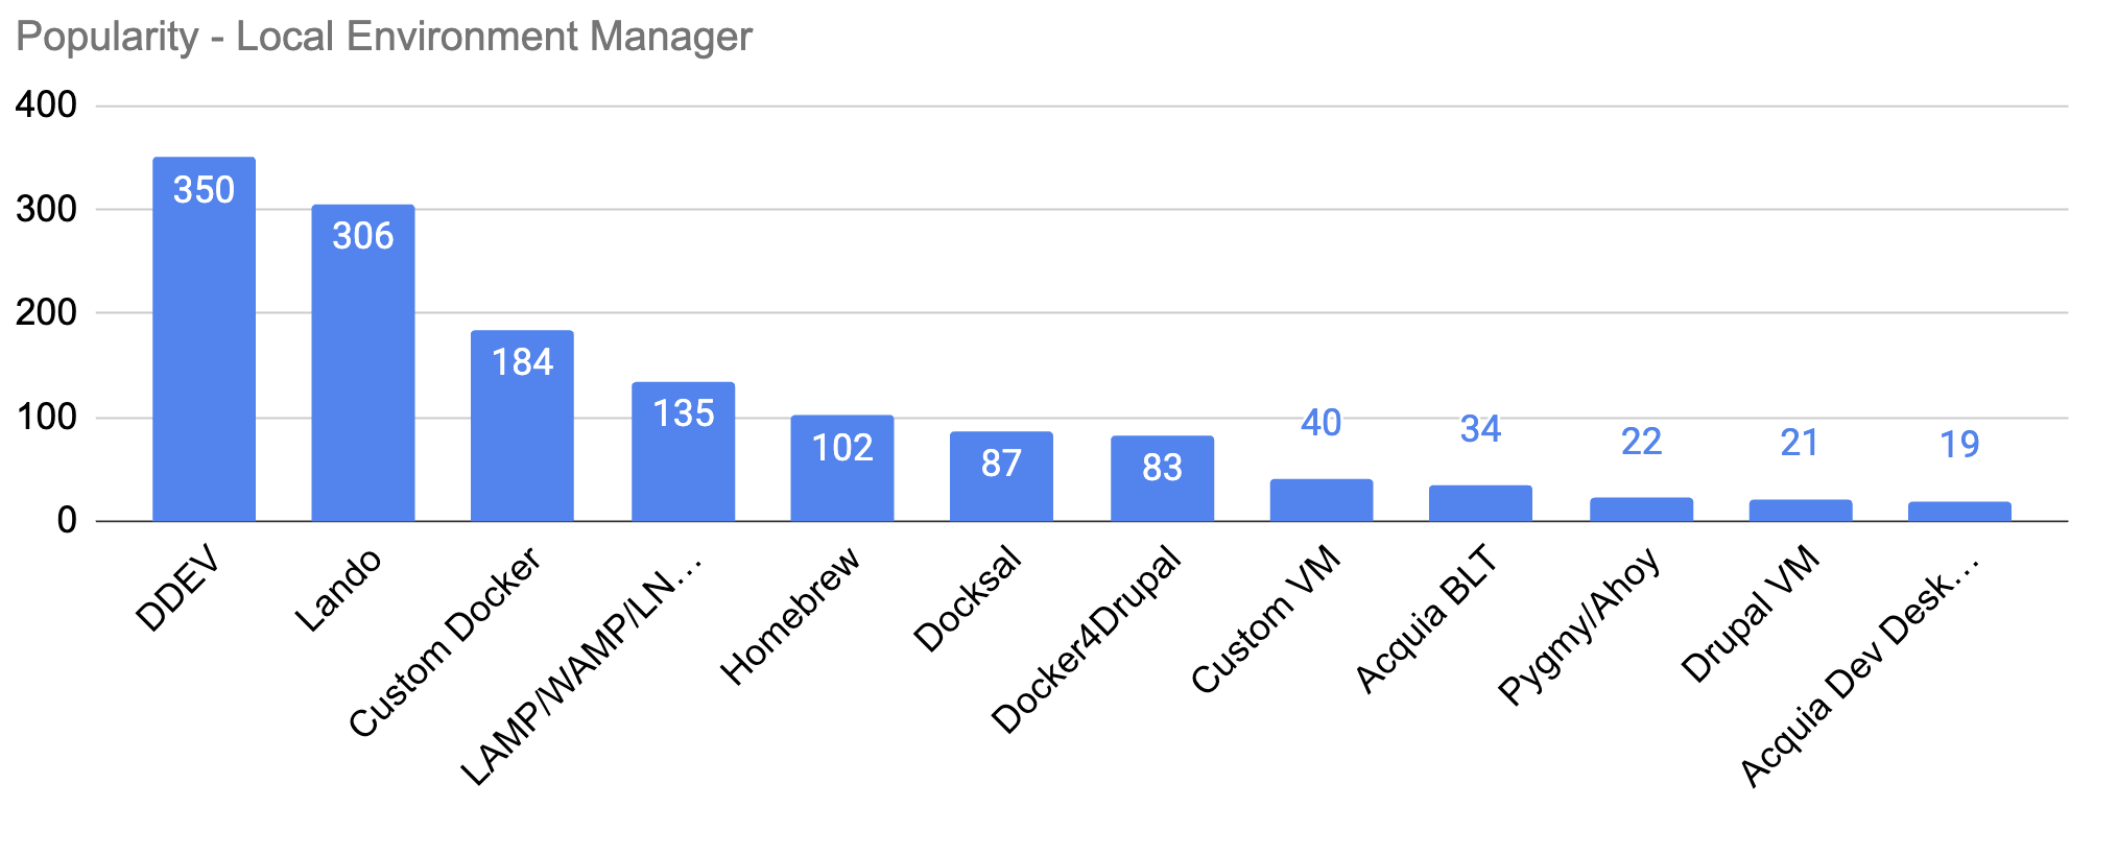 'Chart: Popularity of Local Environment Managers'